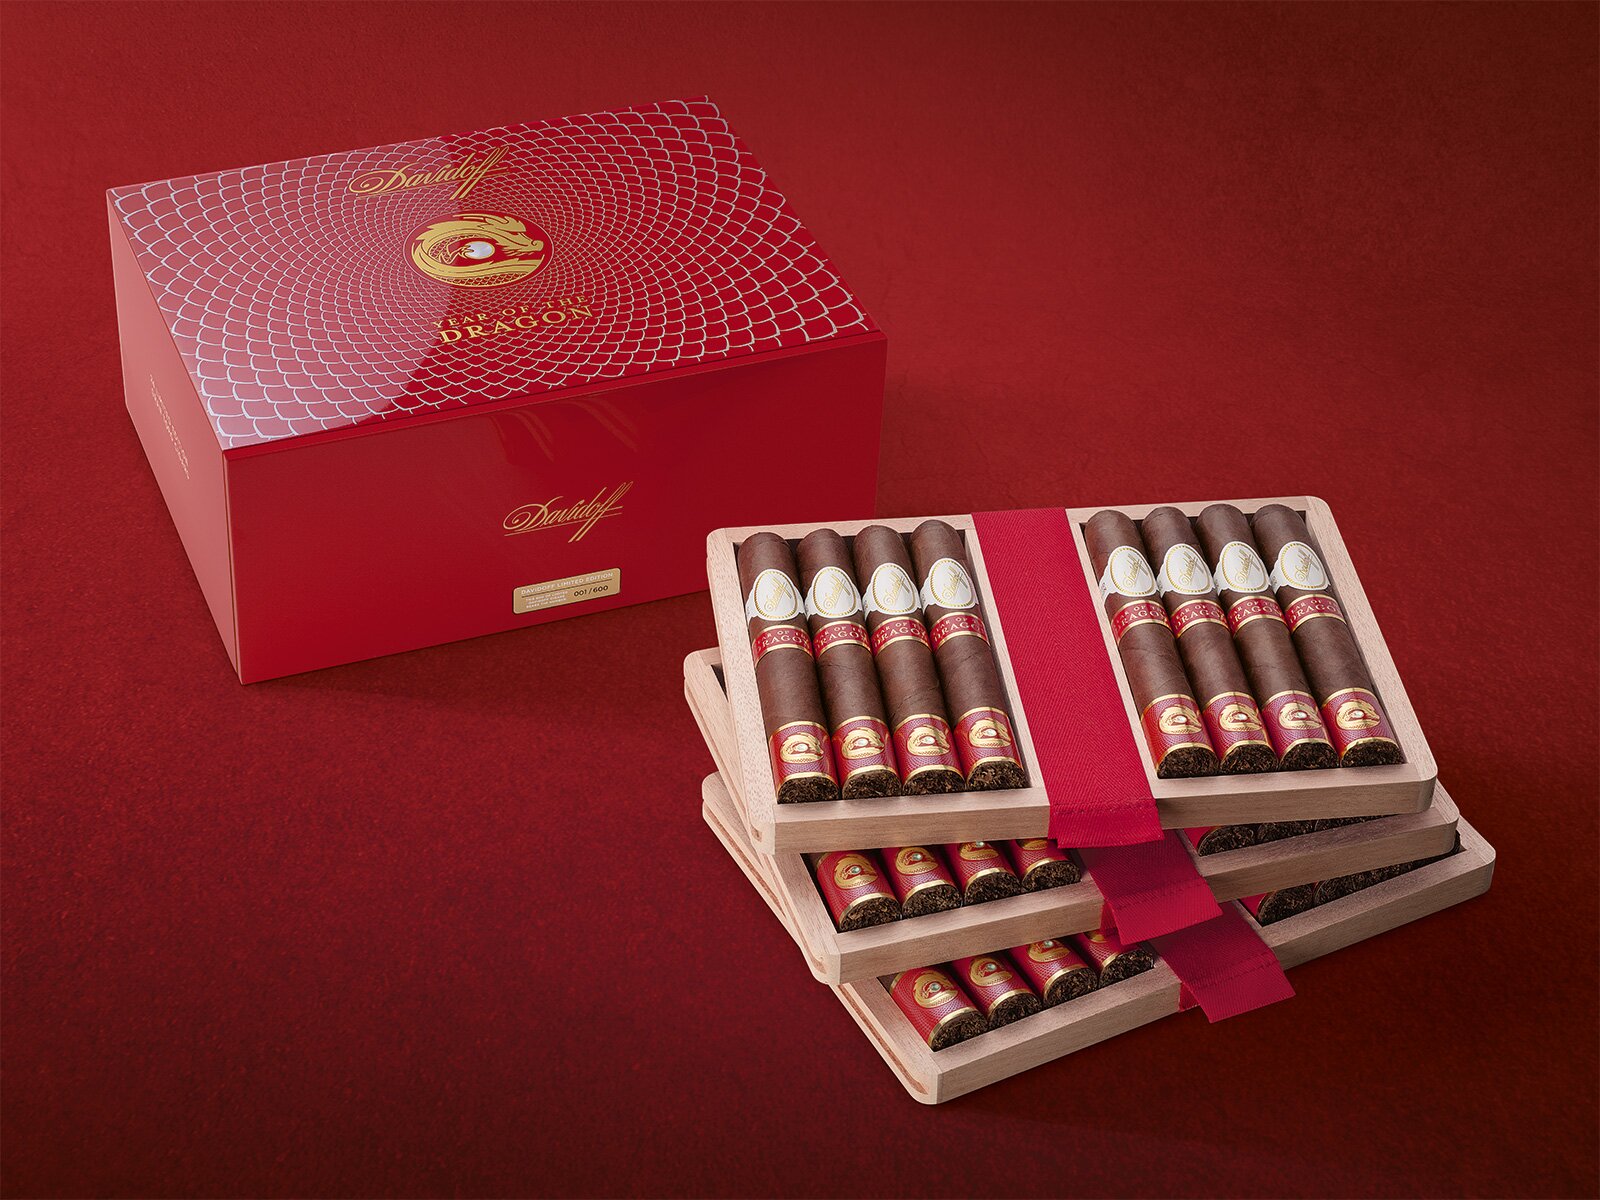 Two Davidoff Year of the Dragon Limited Edition Gran Toro cigars placed on the lid of their box.